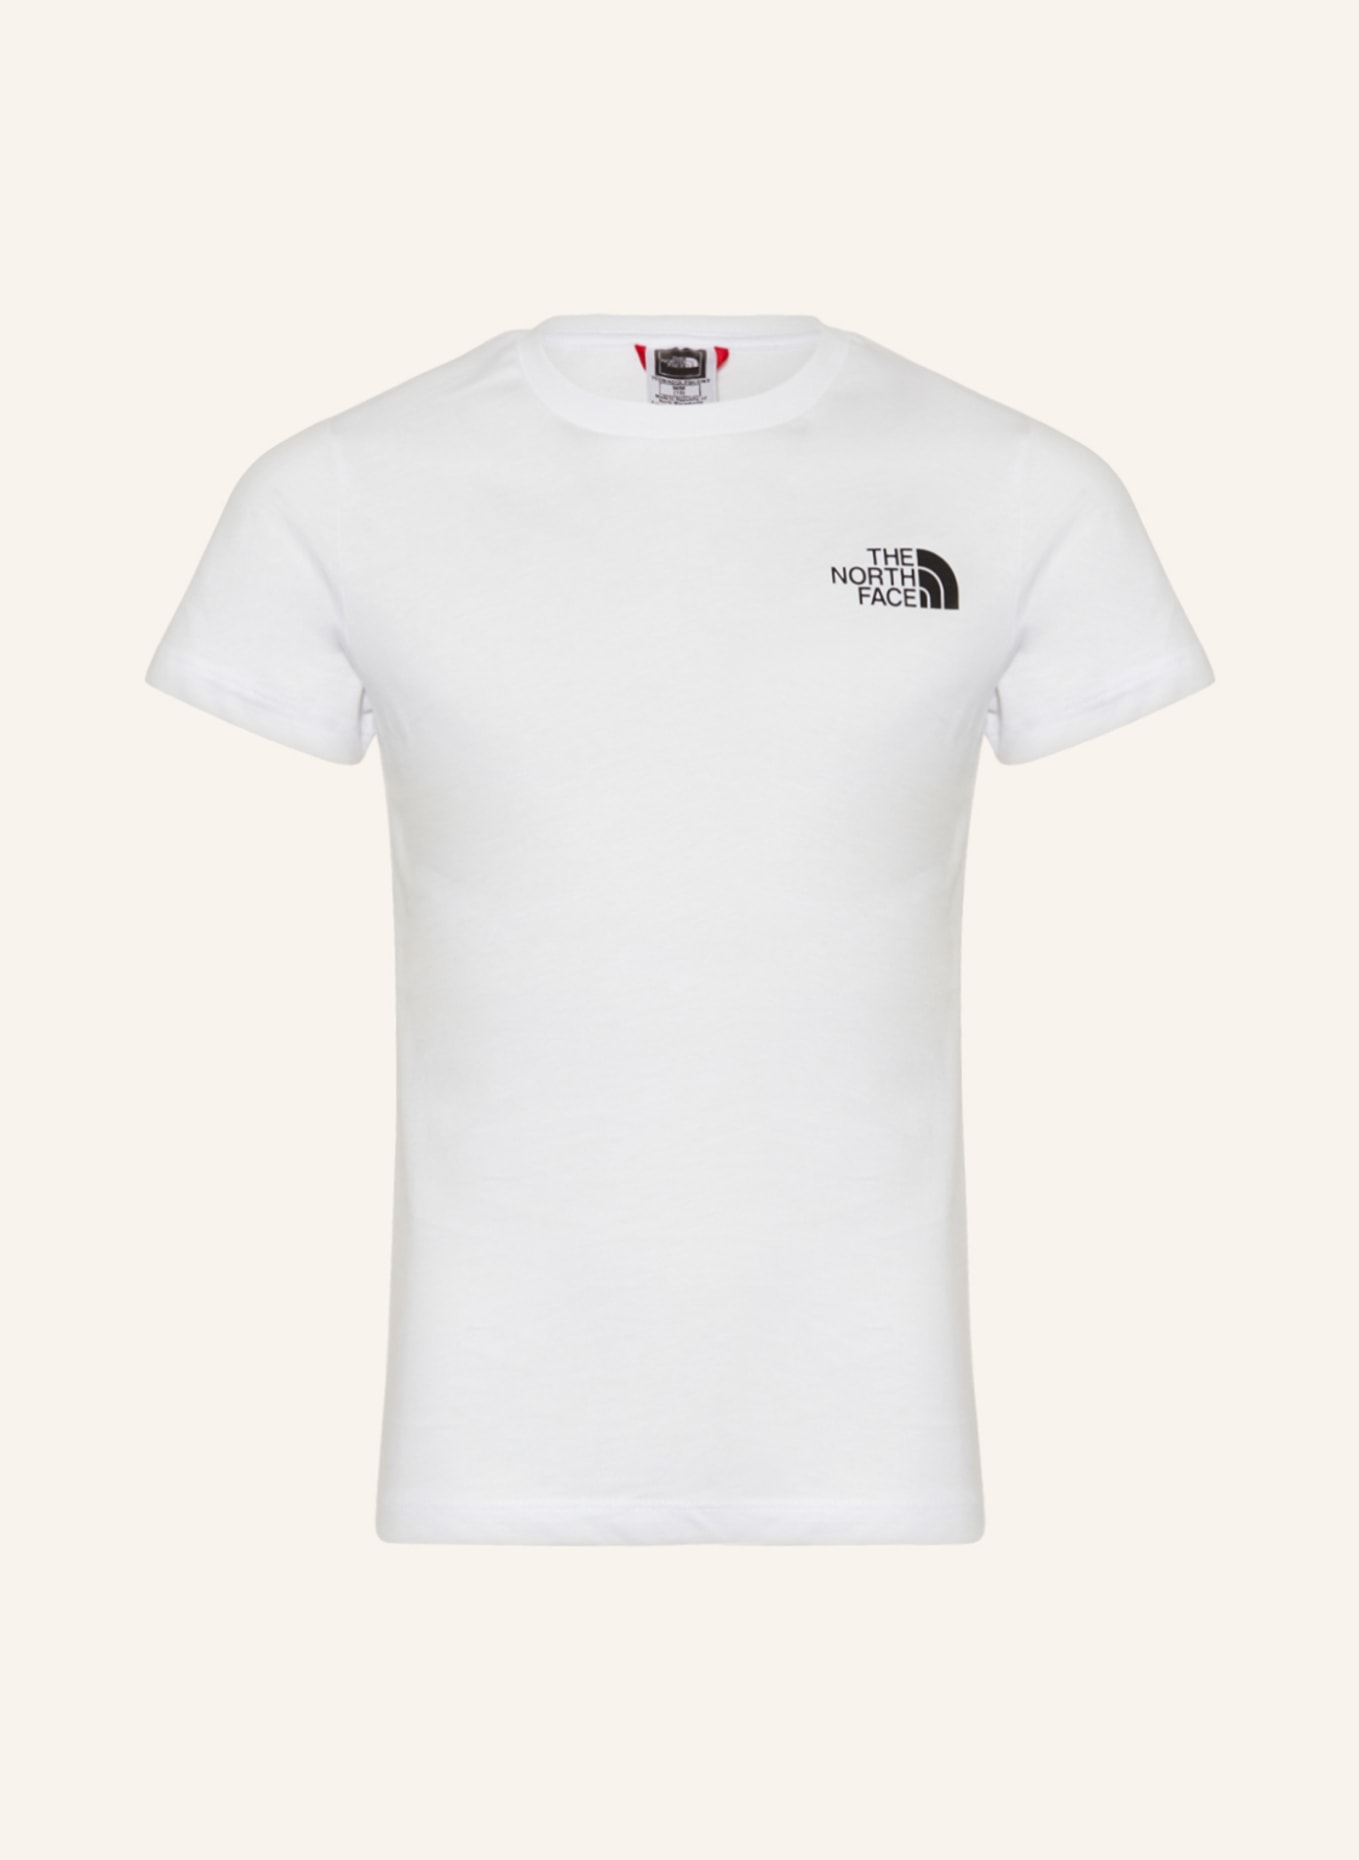 THE NORTH FACE T-Shirt, Farbe: WEISS (Bild 1)